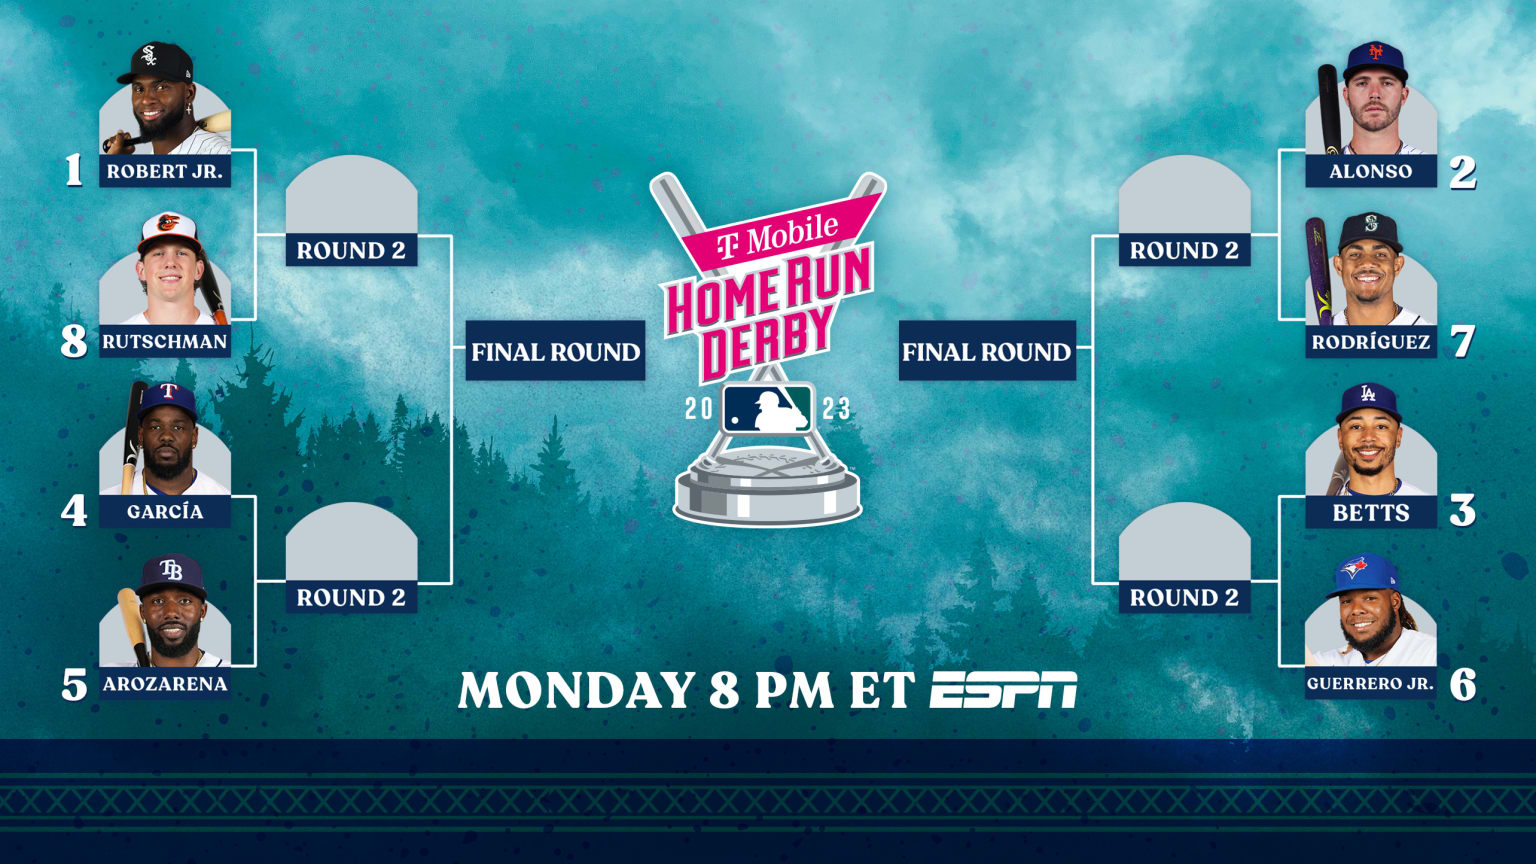 Current home run leader Mookie Betts won't be in the home run derby 